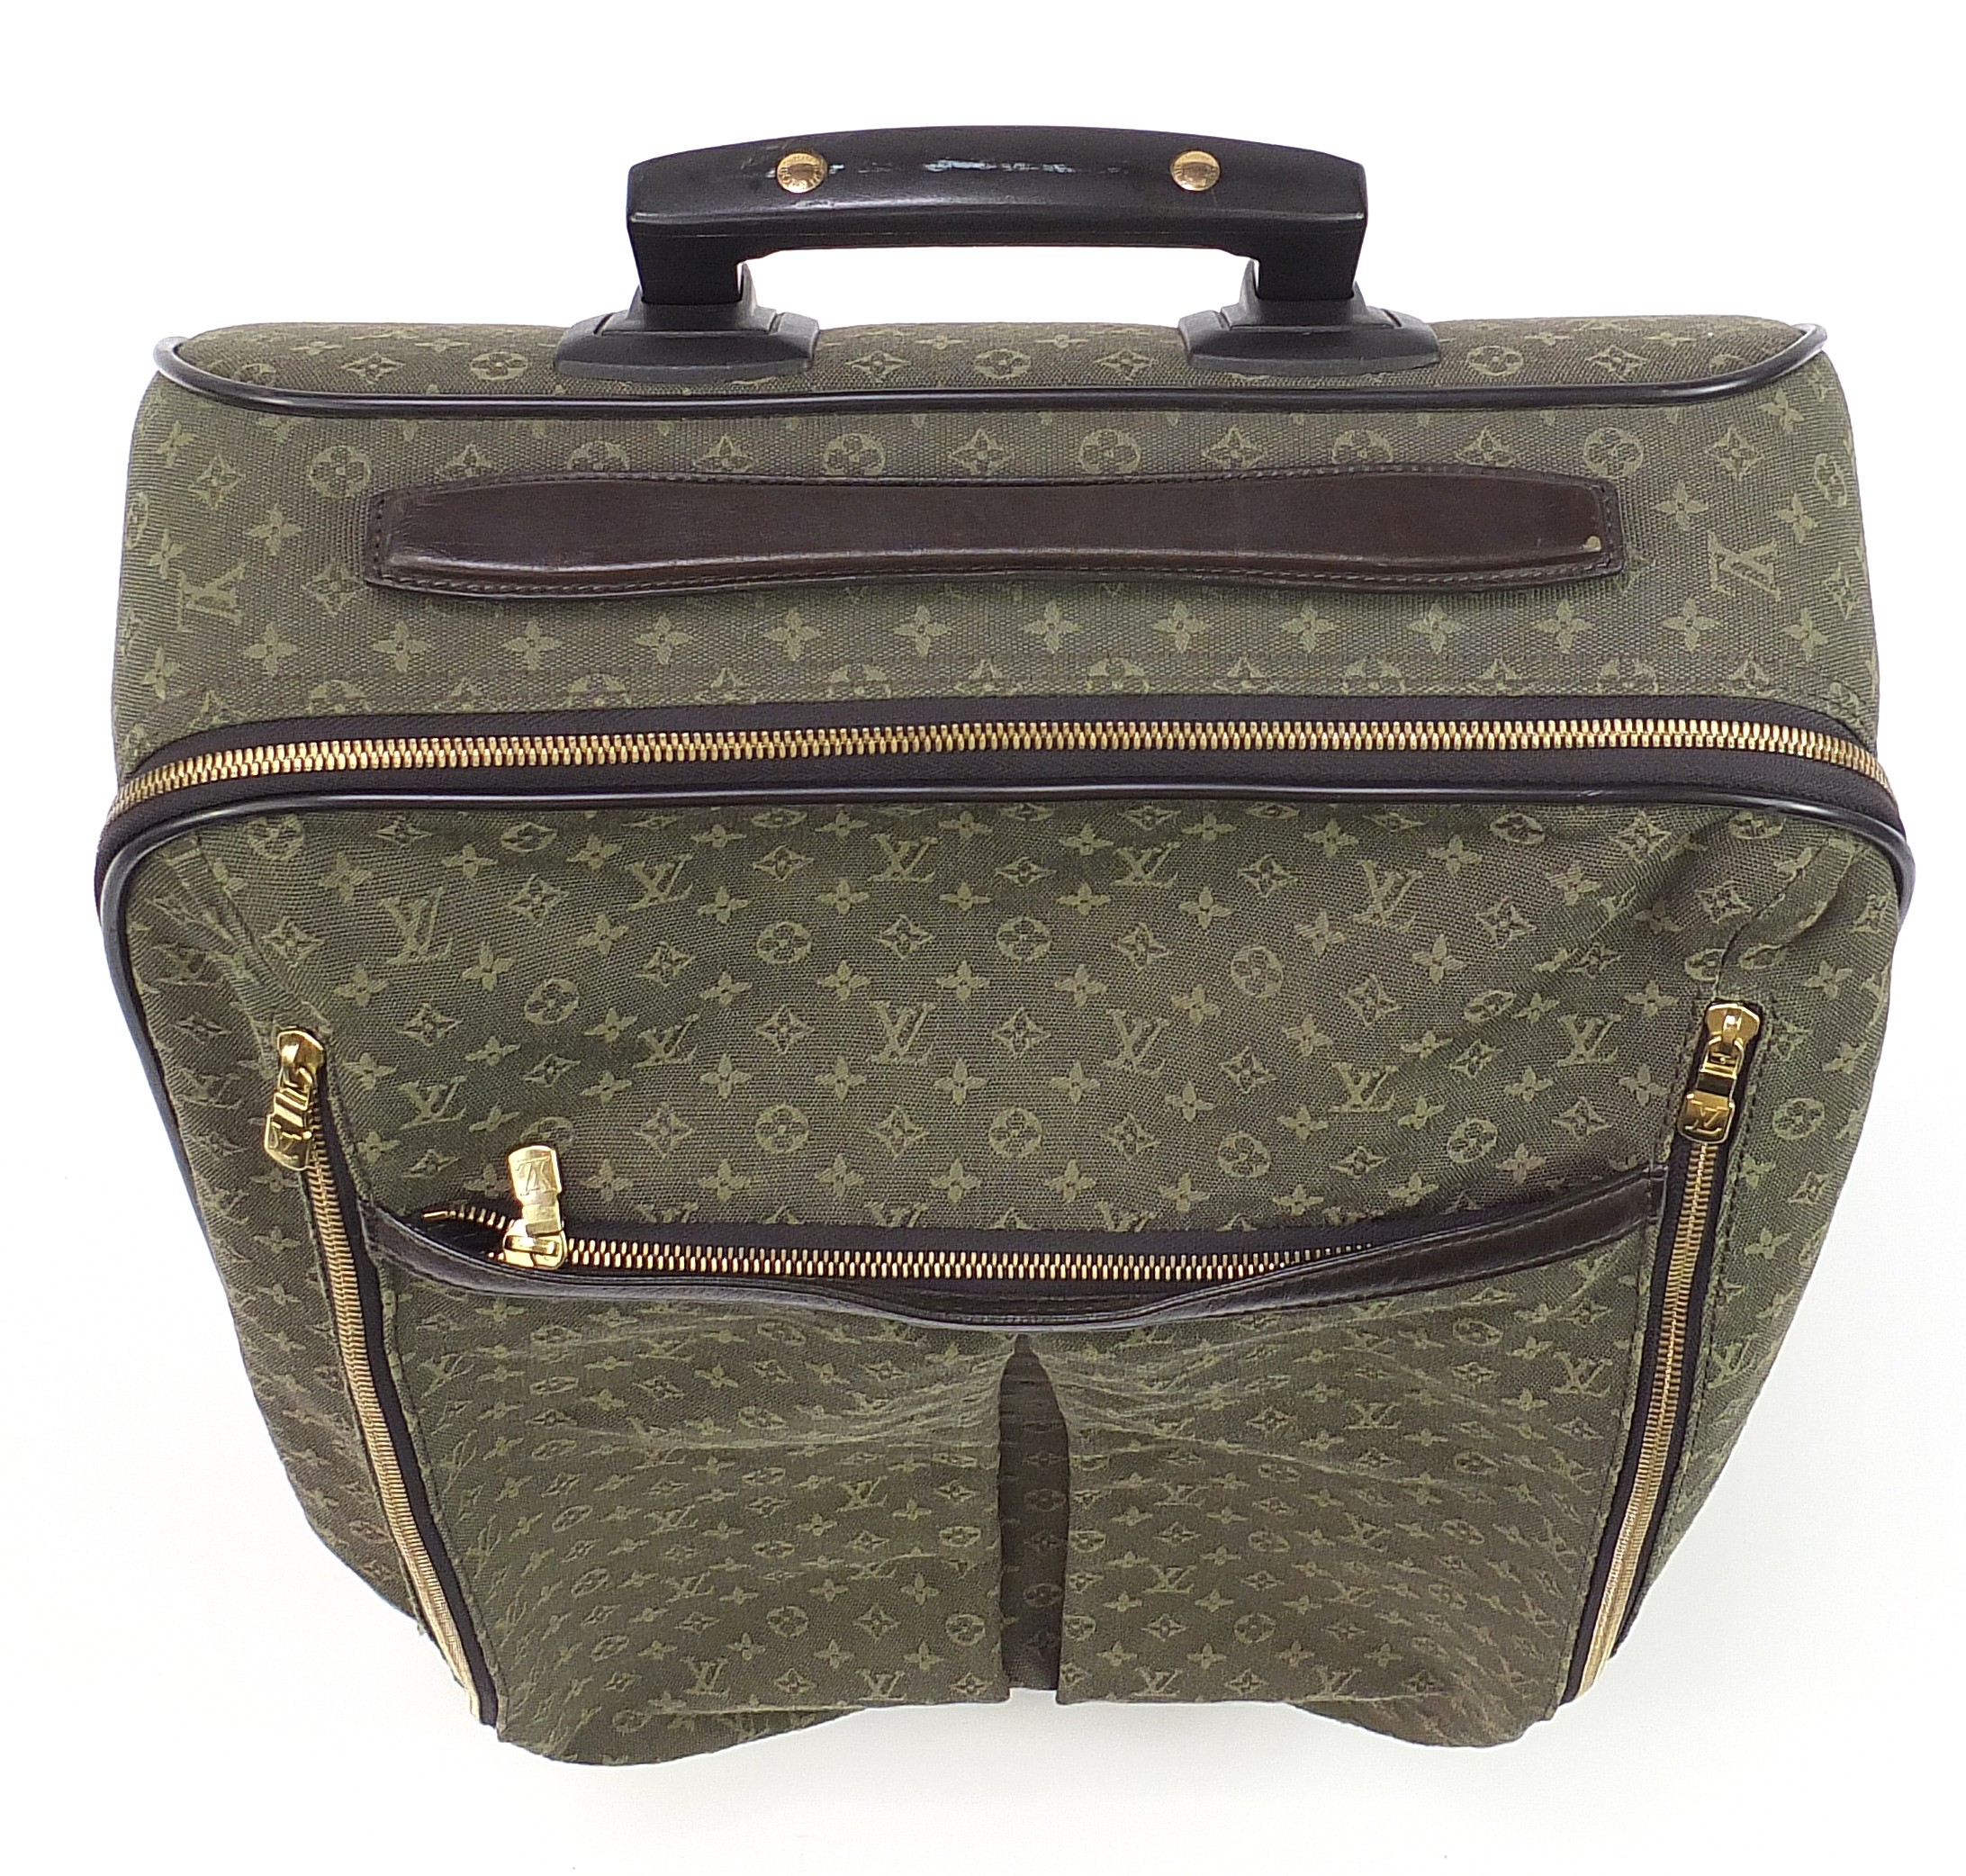 Louis Vuitton Pegase green monogrammed canvas trolley travel suitcase, serial number SP0062, 57cm - Image 4 of 11